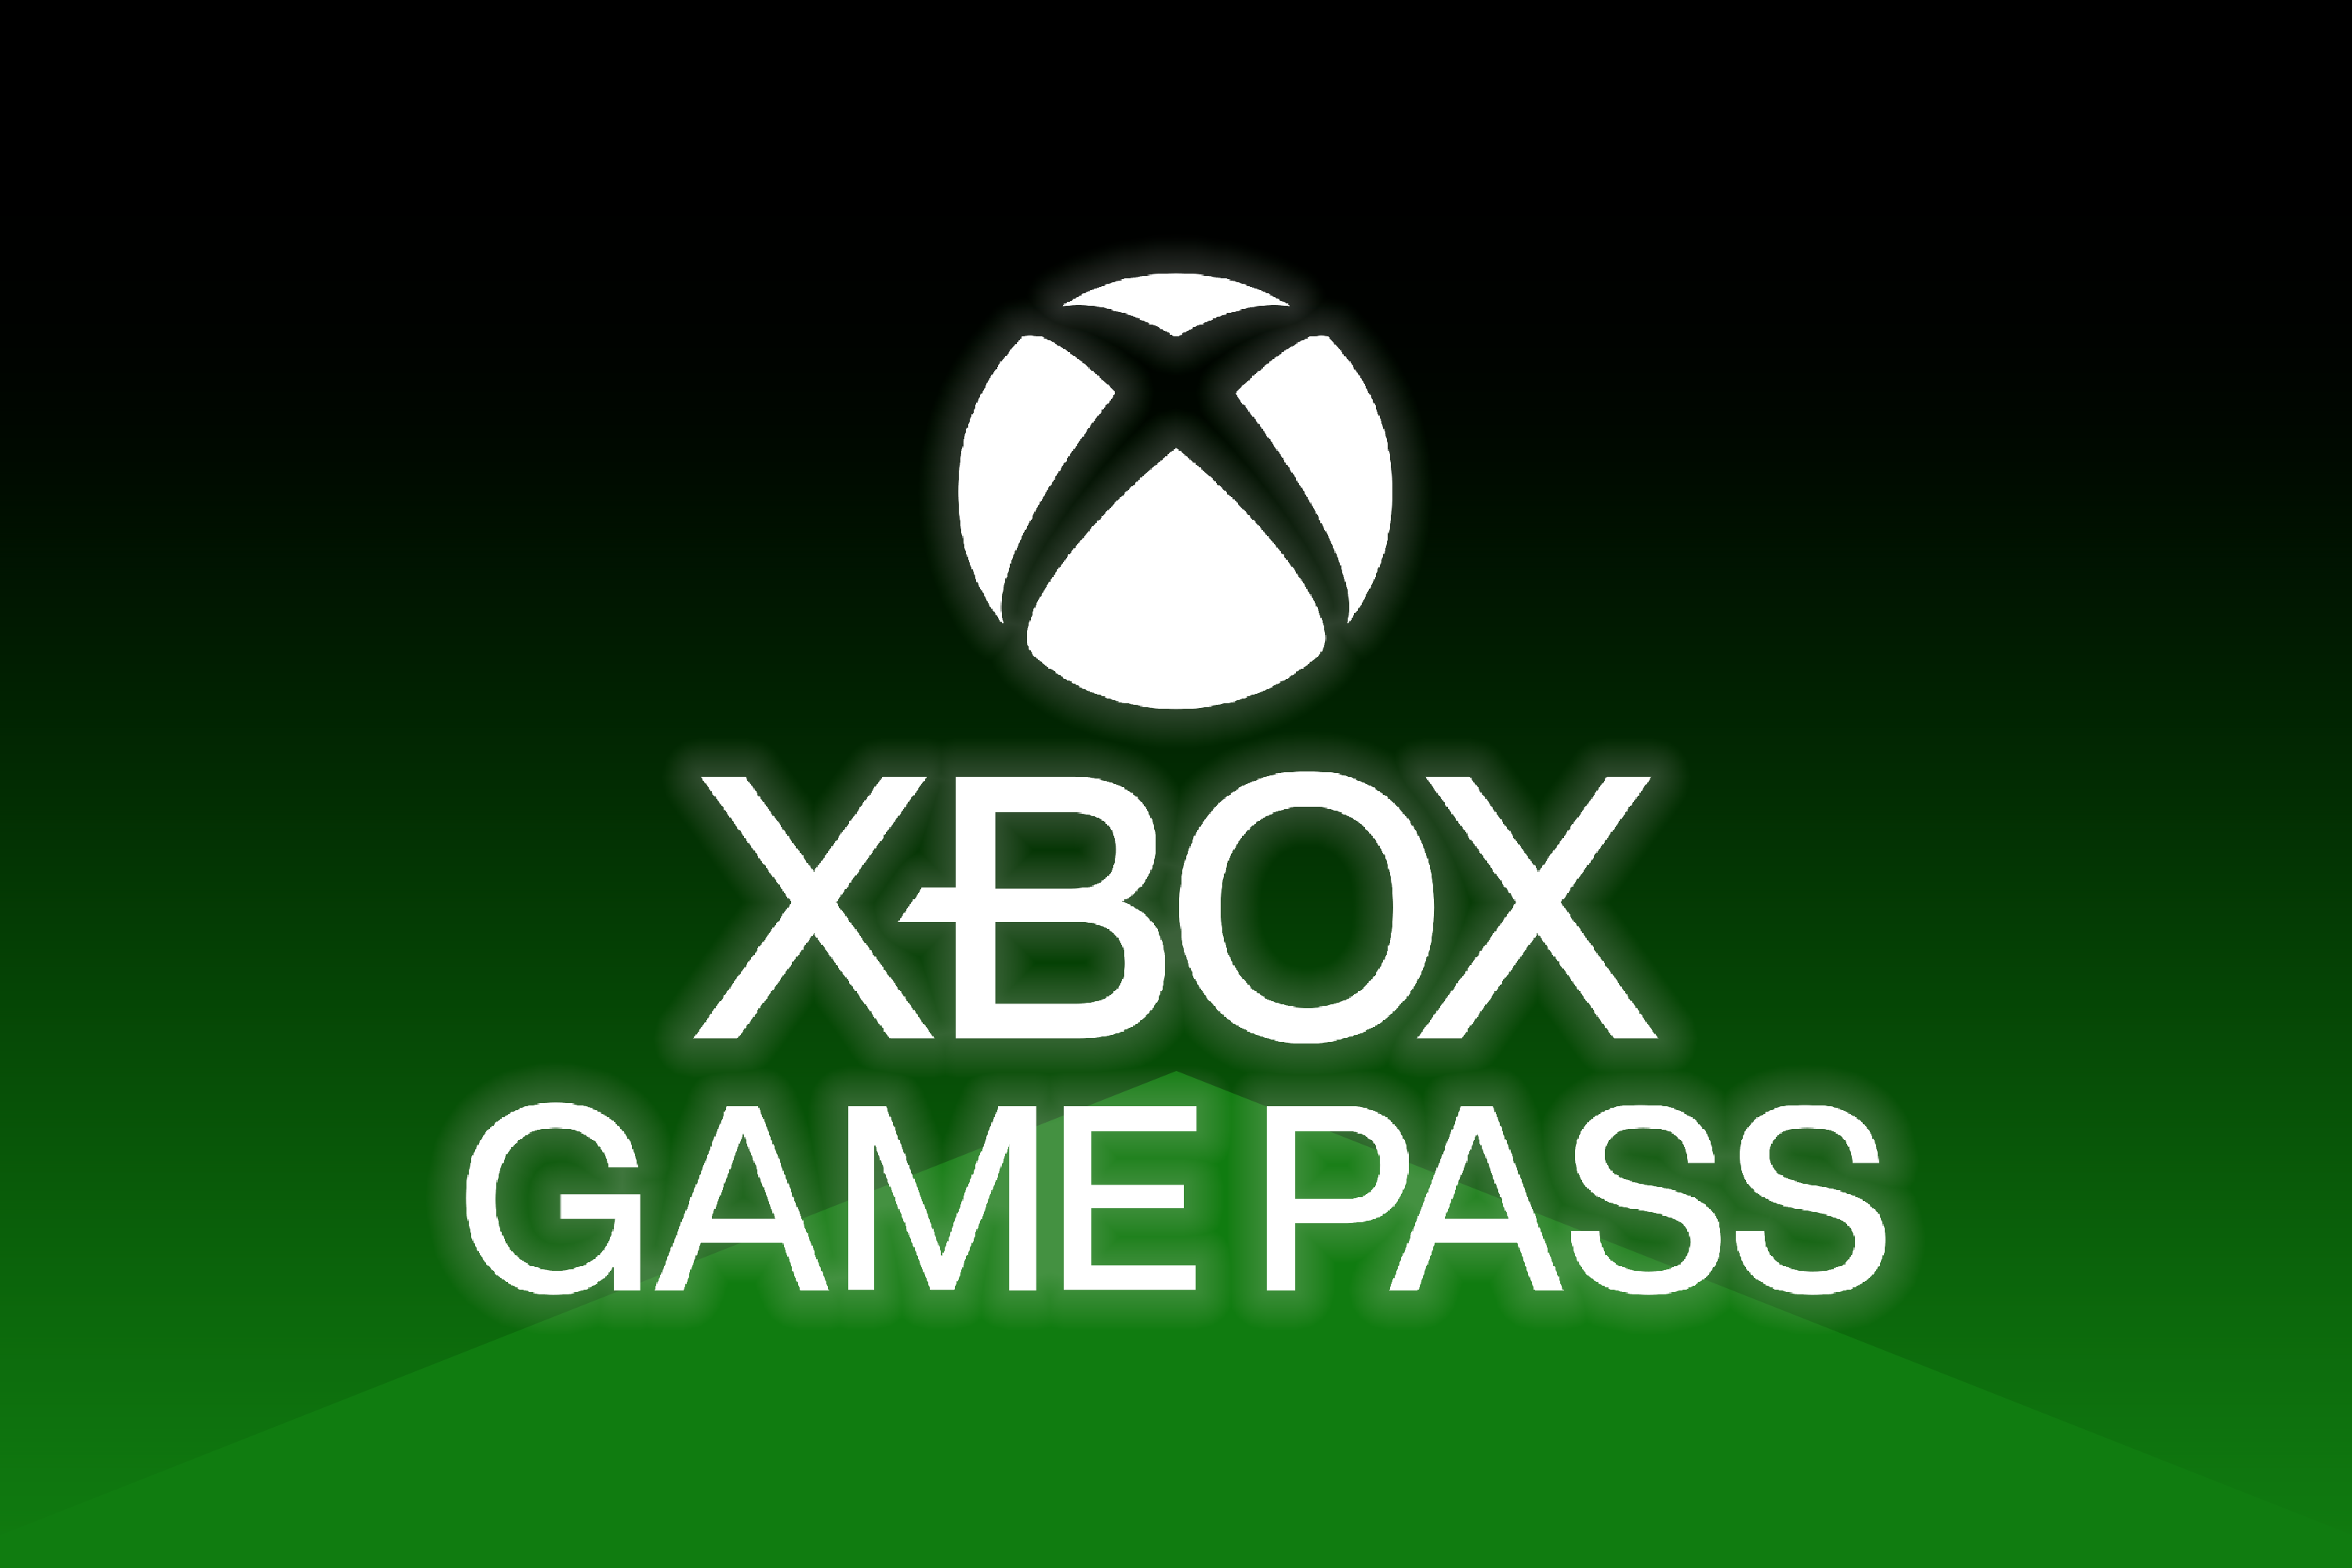 Xbox Game Pass Ultimate: What to know and how to join